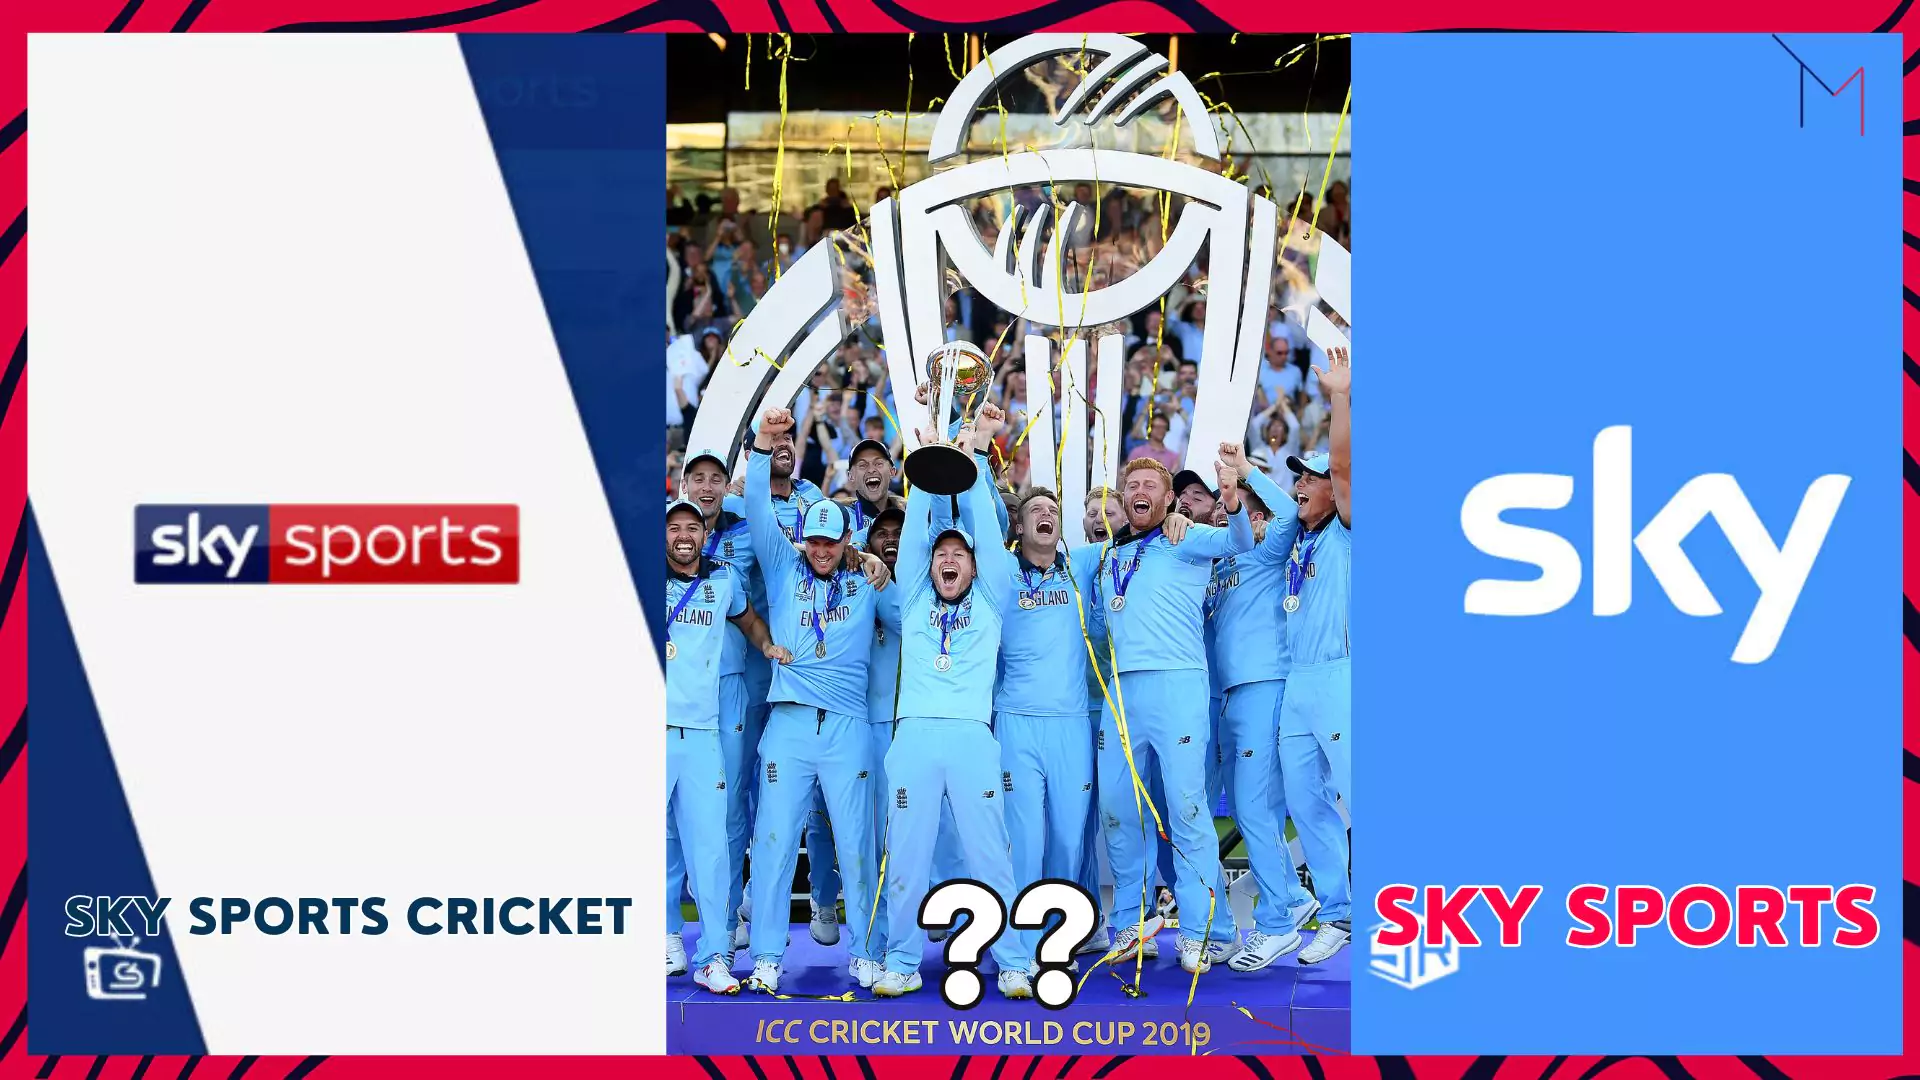 How to watch the Cricket World Cup in England